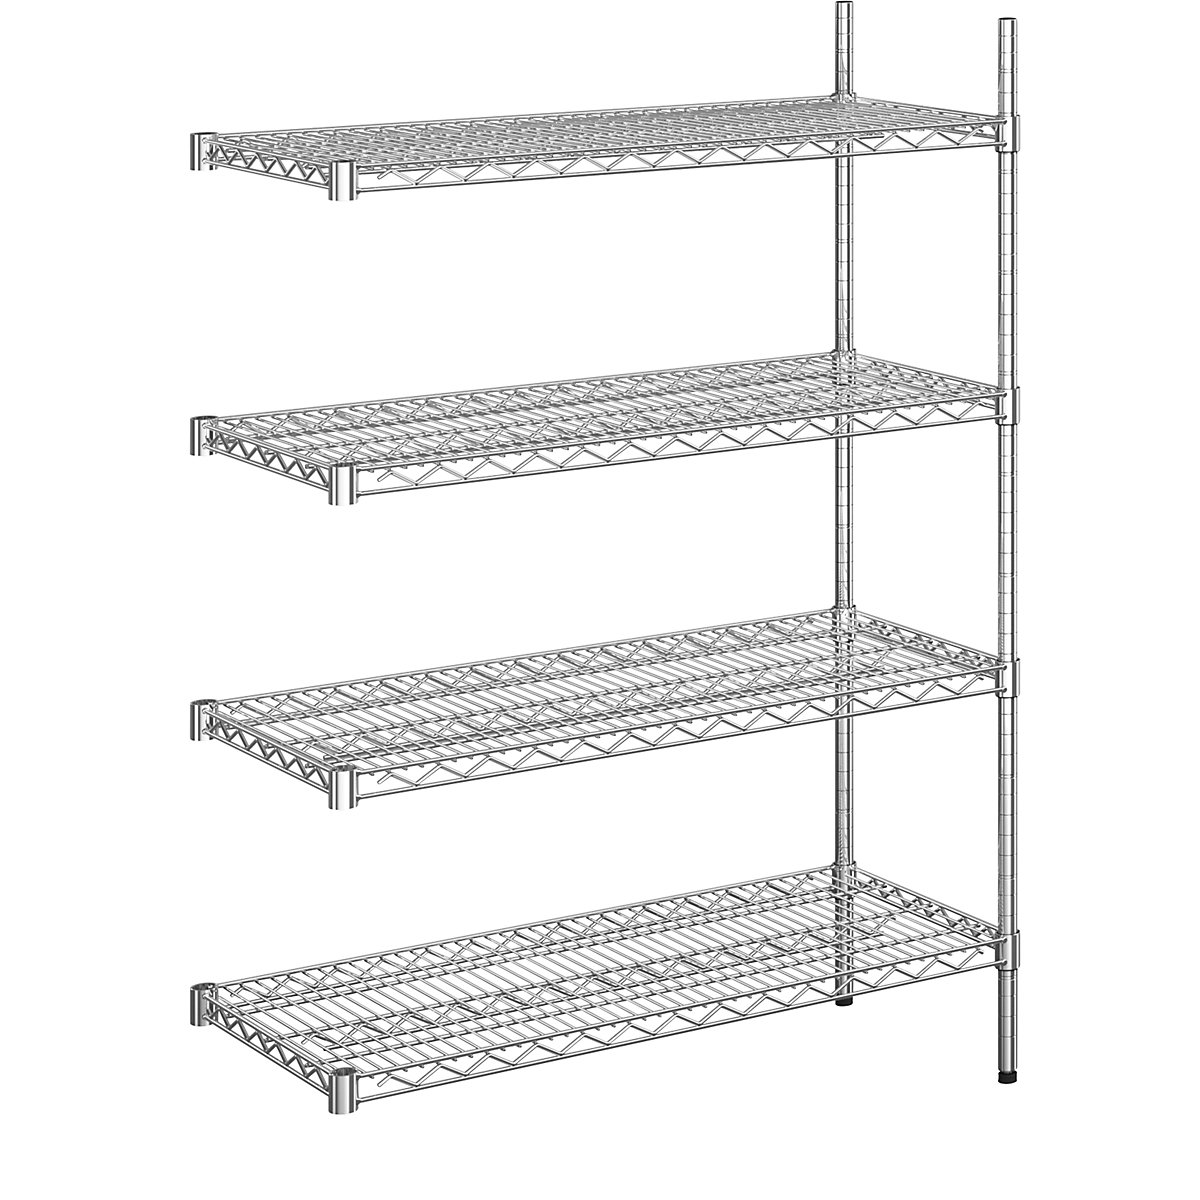 Steel Wire Mesh Shelf Unit Chrome, S Hooks For Wire Shelving Units